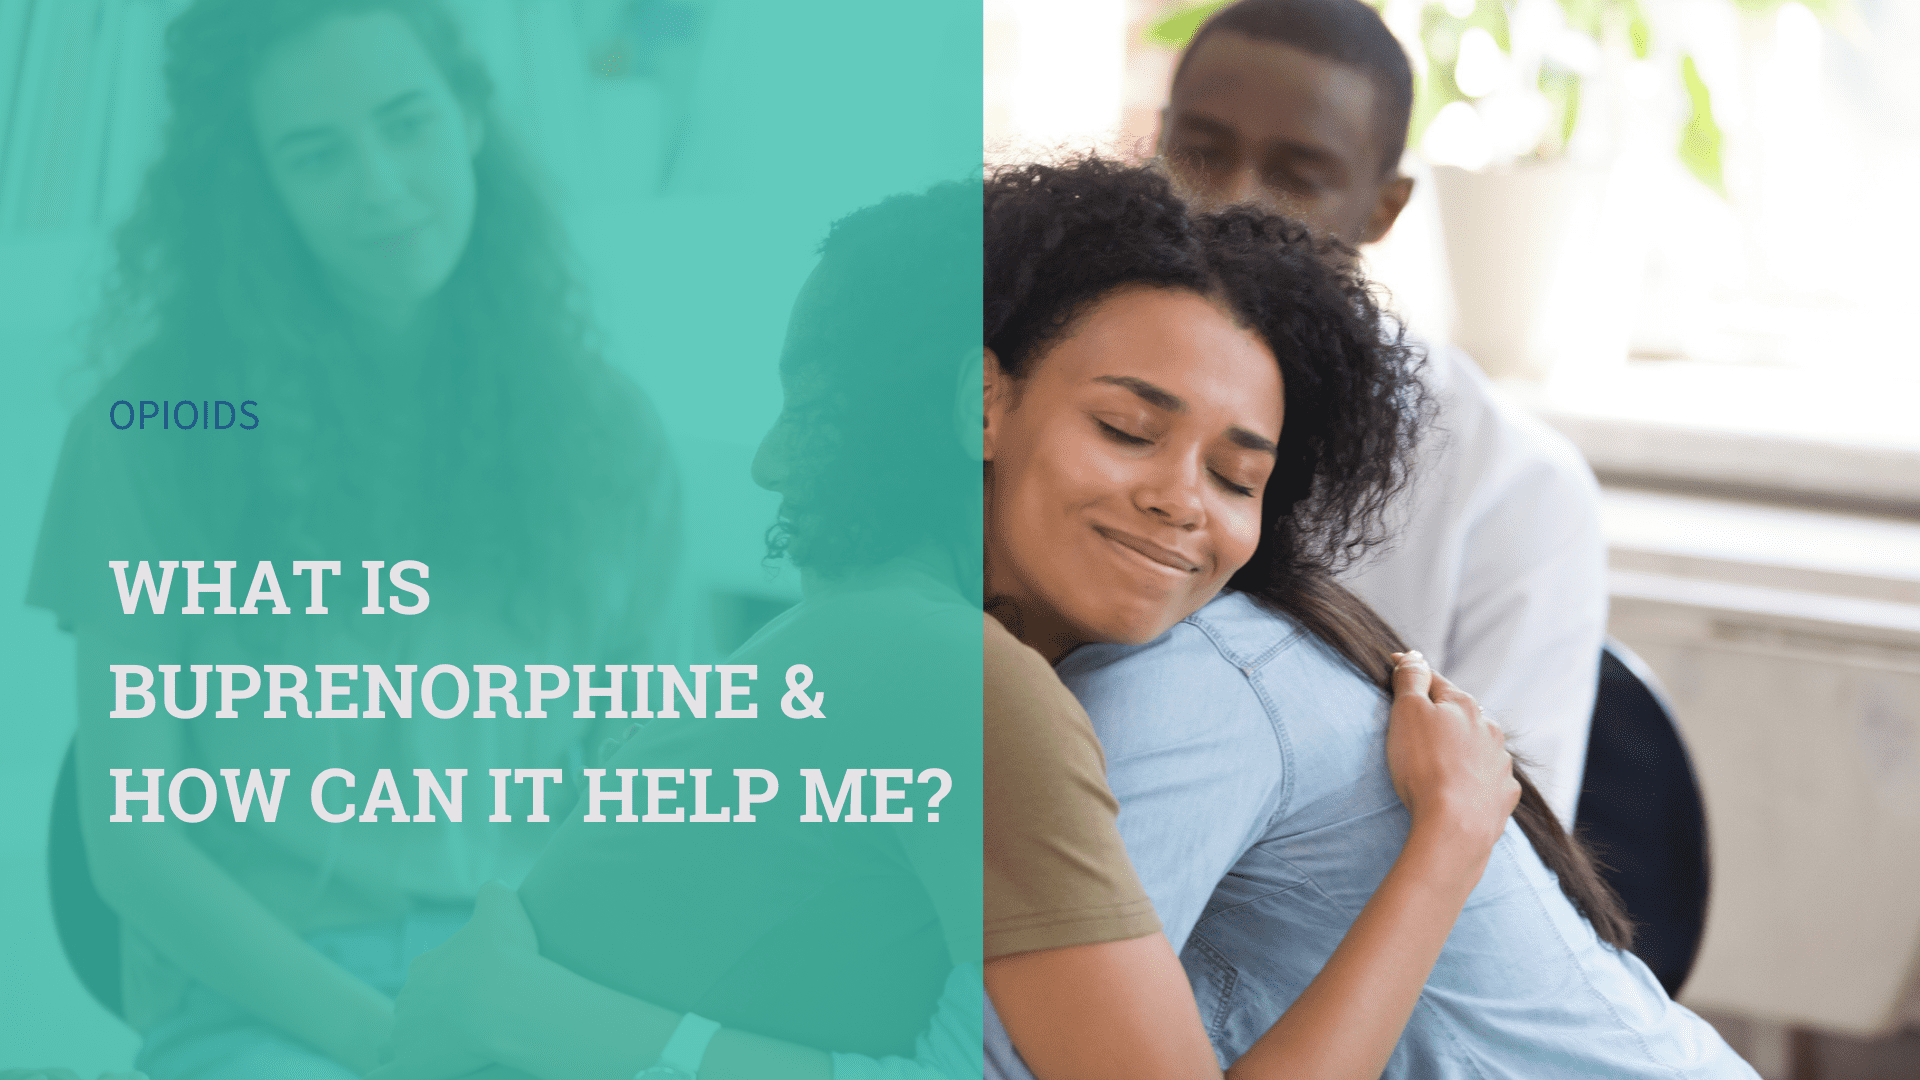 What Is Buprenorphine (Suboxone) & How Can it Help Me?